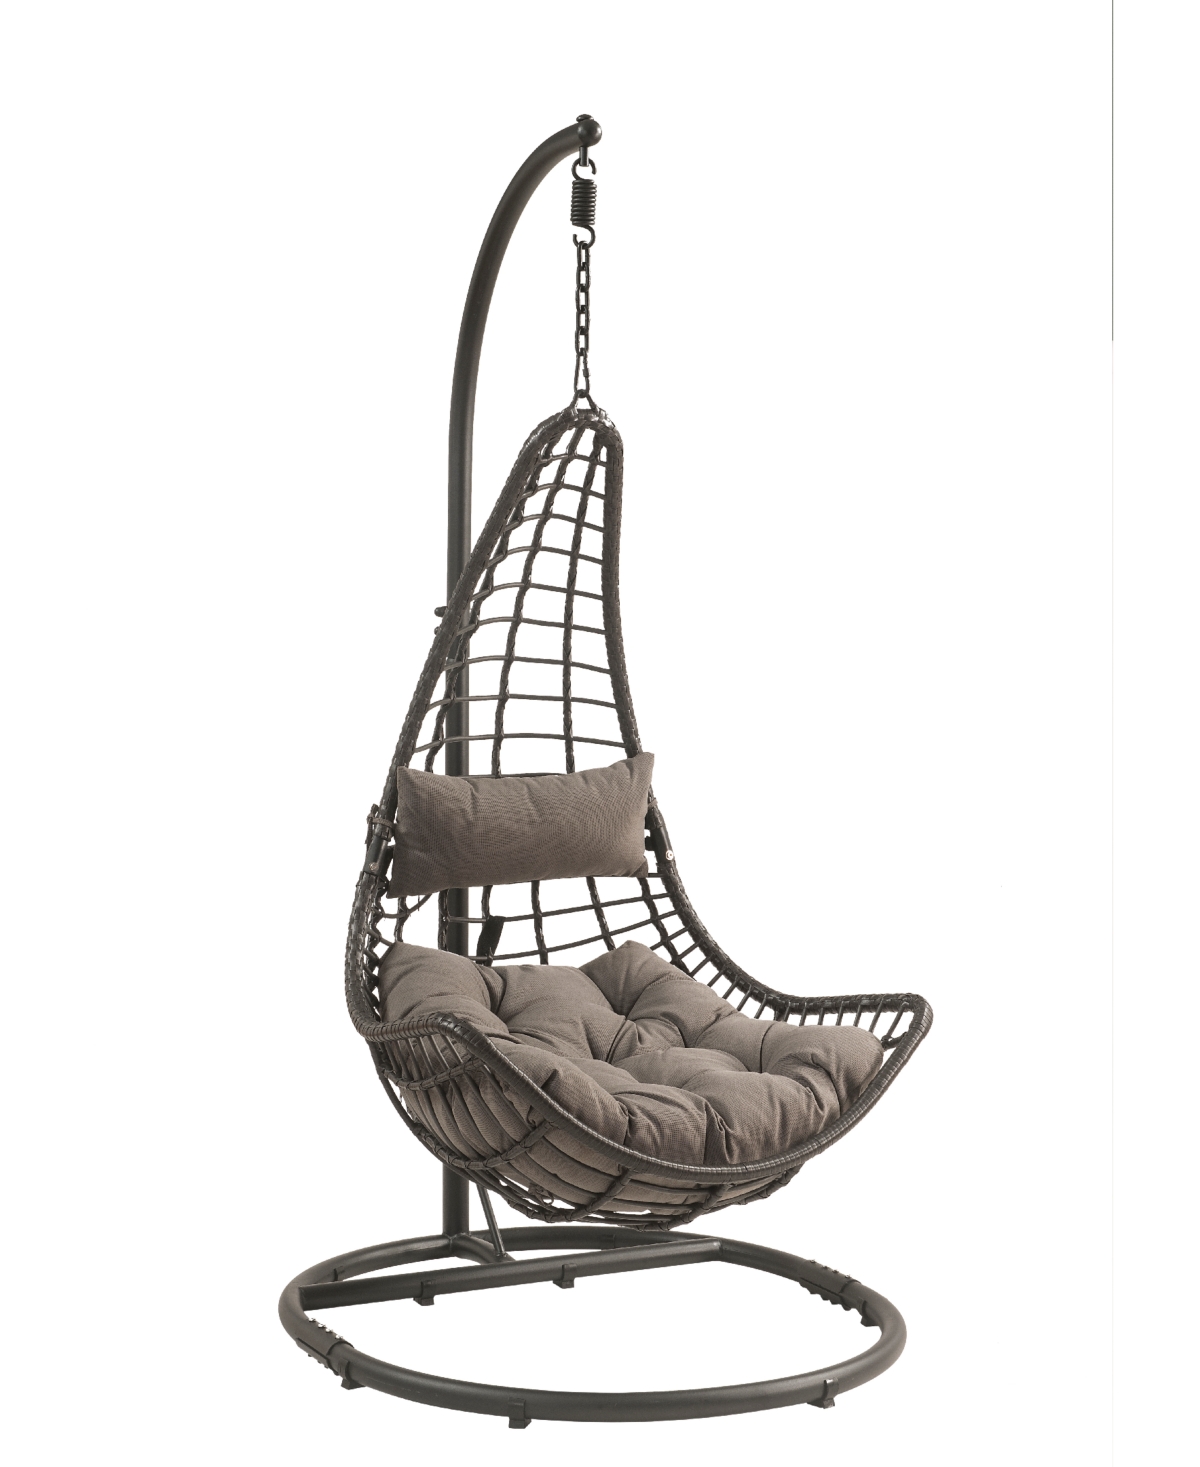 Acme Furniture Uzae Patio Chair In Gray Fabric And Charcaol Wicker